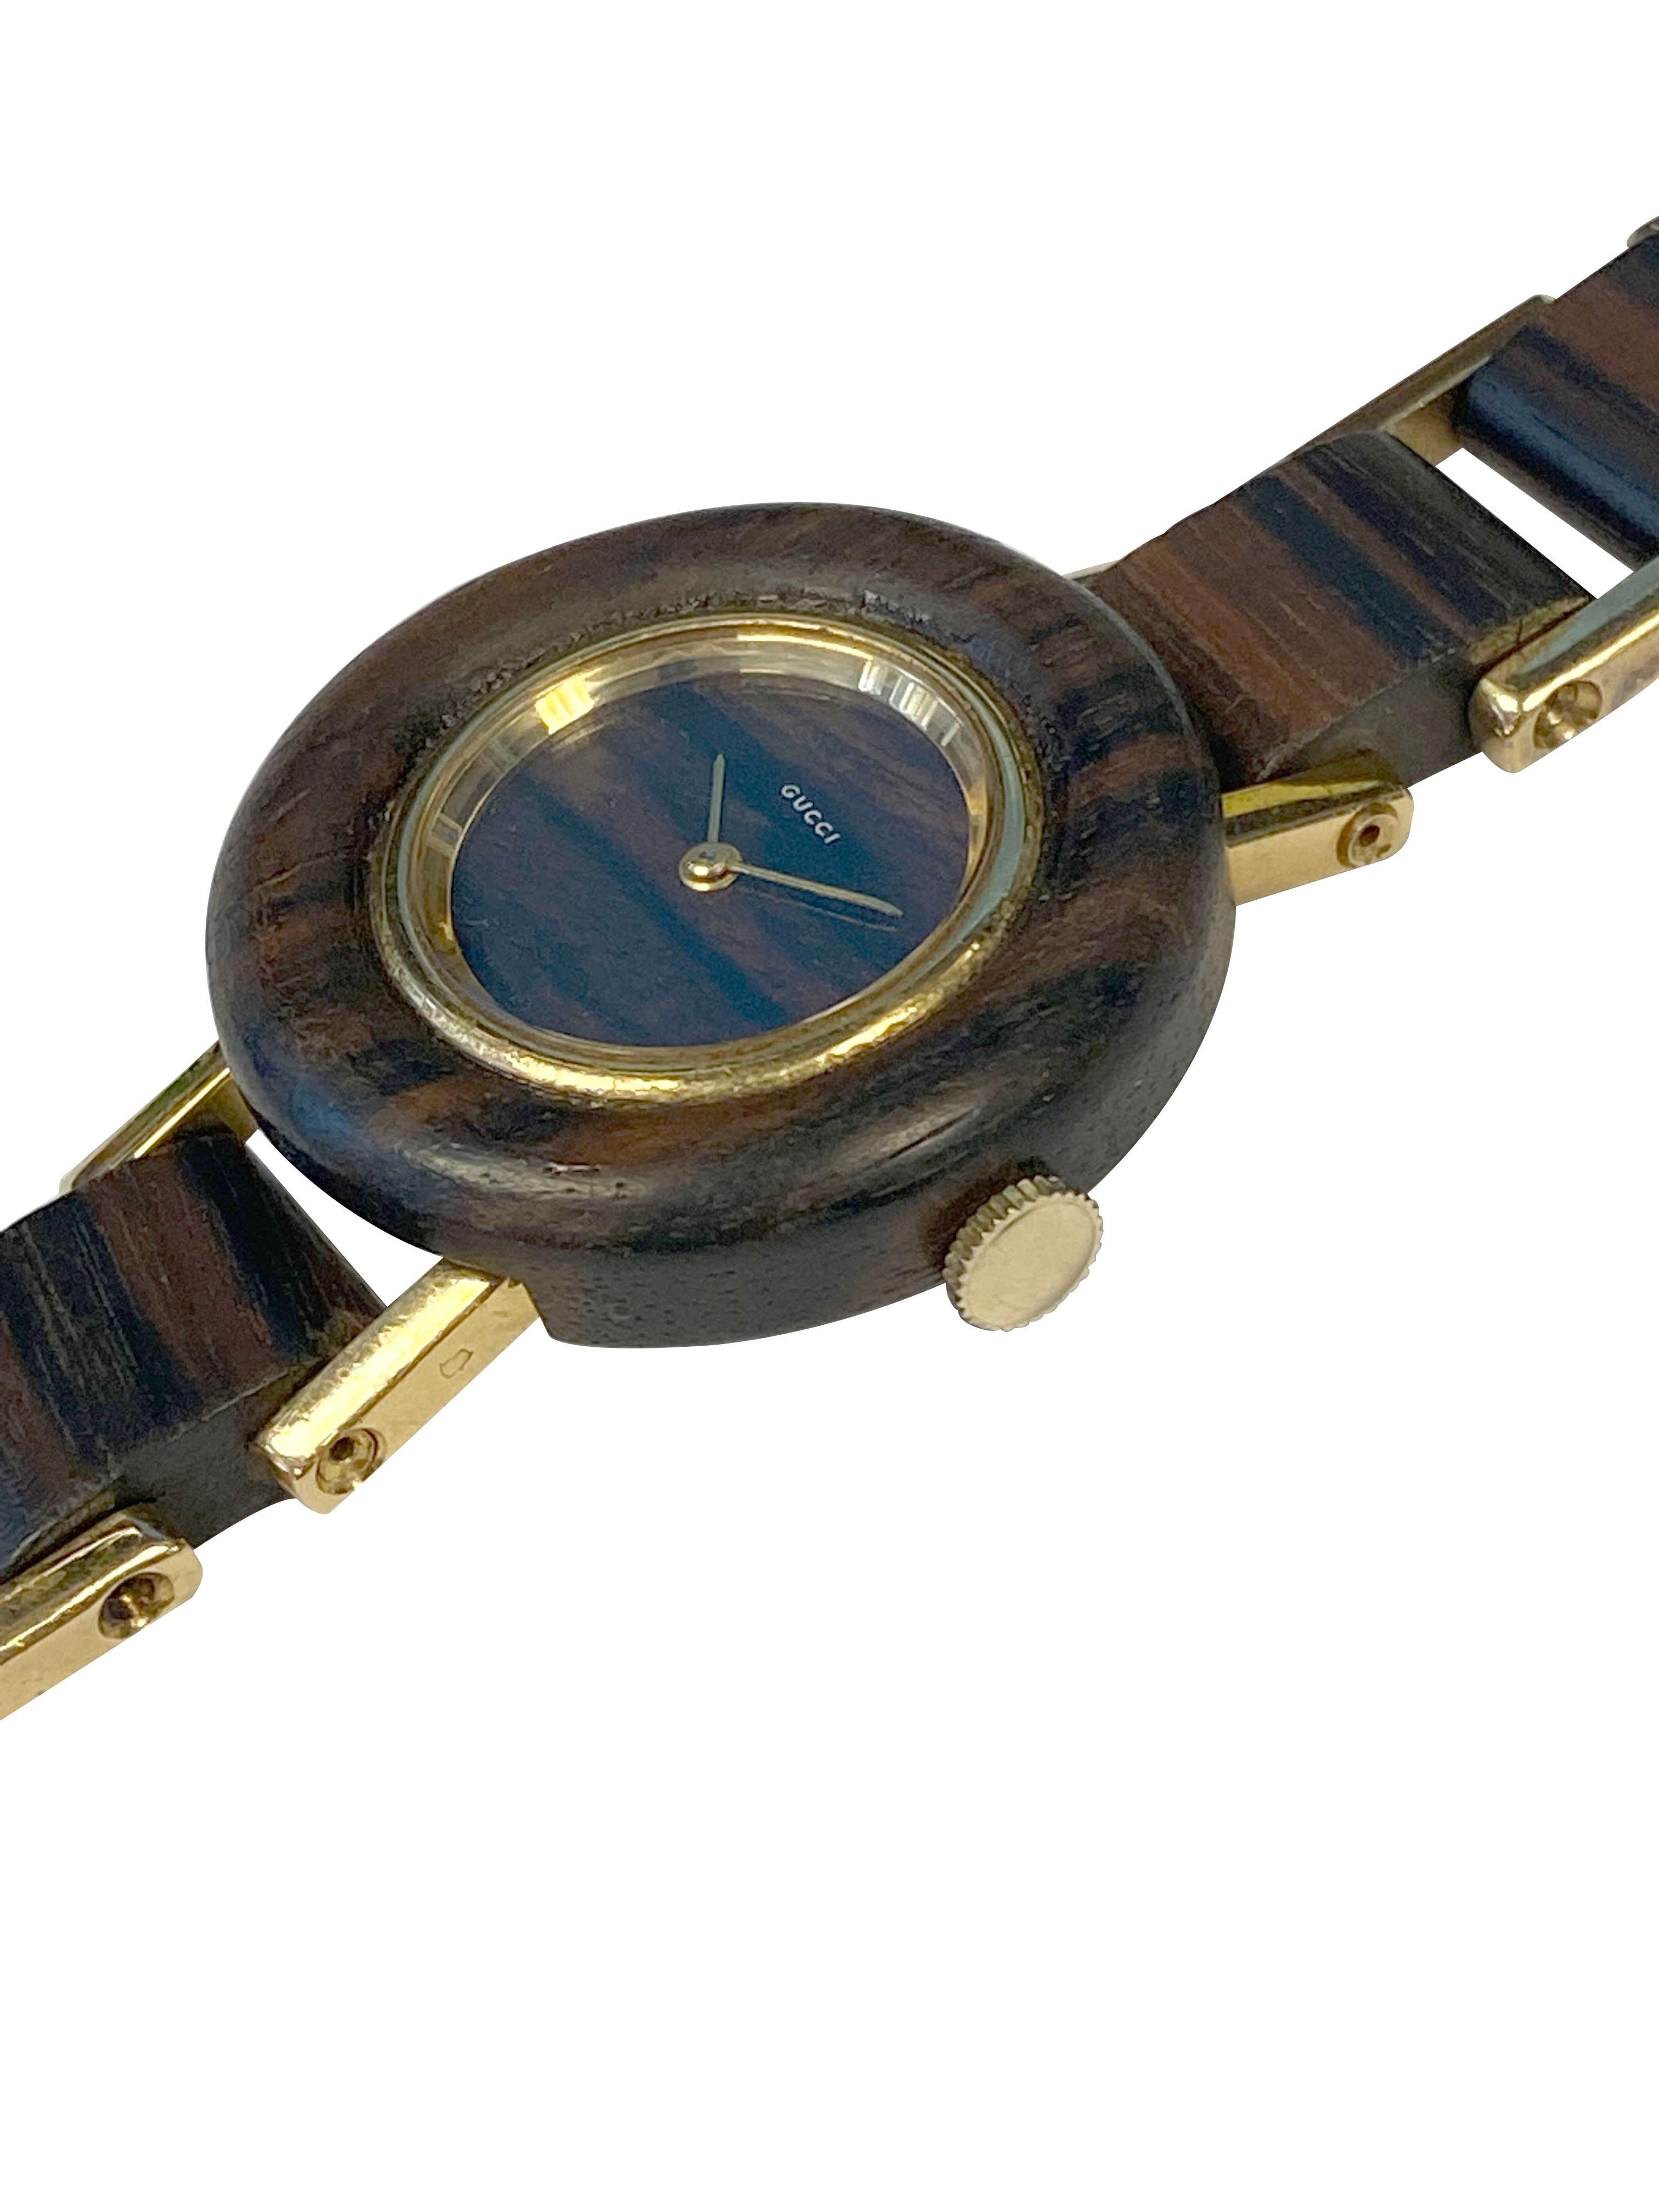 Circa 1970s Gucci Wrist Watch, 33 M.M. 1 piece Solid Wood Case with an 18k Yellow Gold Bezel, Gold case back and Lugs. 17 Jewel Mechanical, Manual wind movement. Solid Wood Dial and Gold Hands. 5/8 inch wide 18K yellow Gold and Wood link Bracelet.